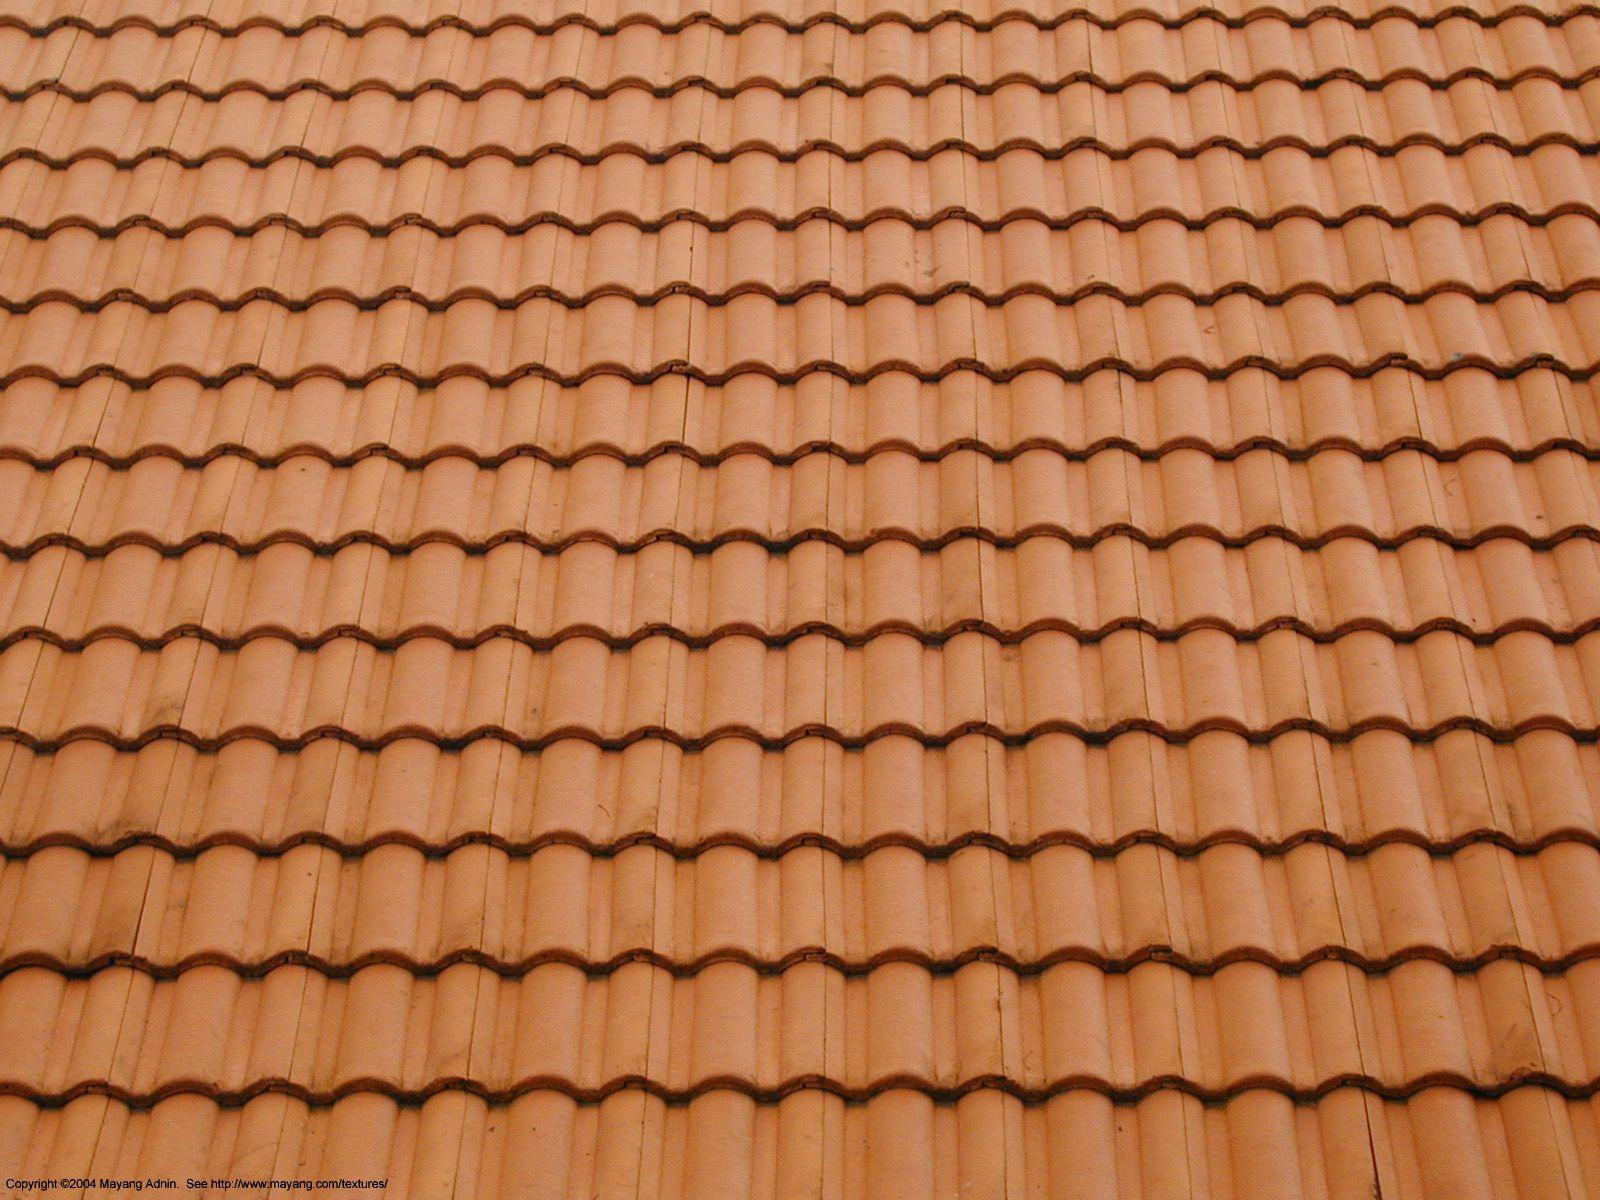 Roof Amusing Tile Roof For Home High Resolution Wallpaper Photo